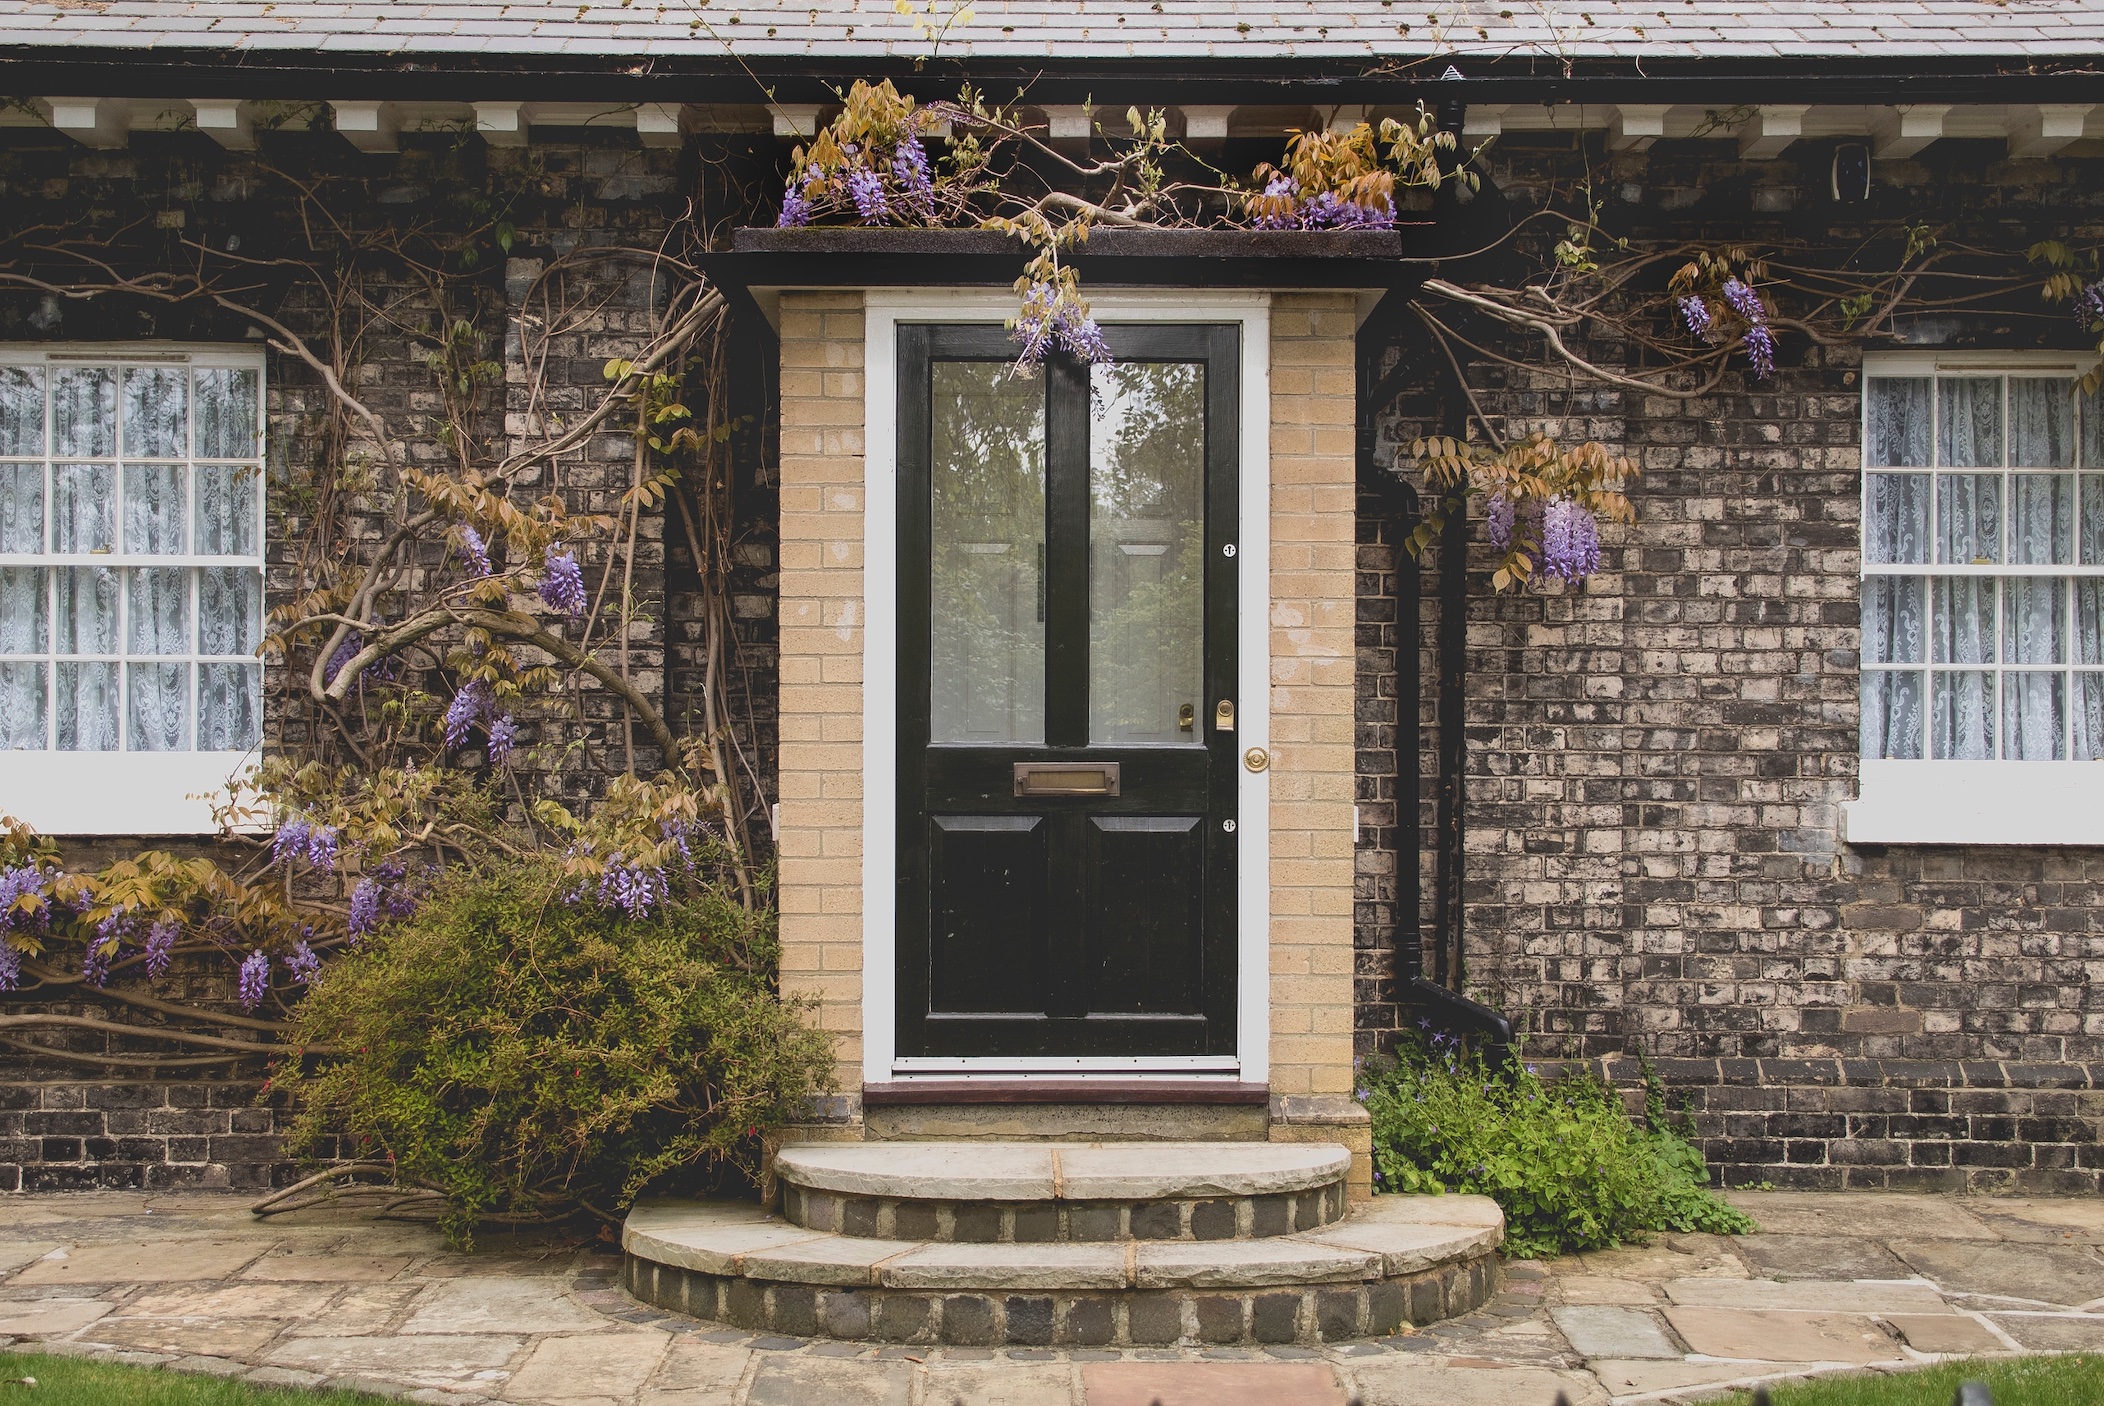 Front door of brick house, with flowers; image by Peter Boccia, via Unsplash.com.